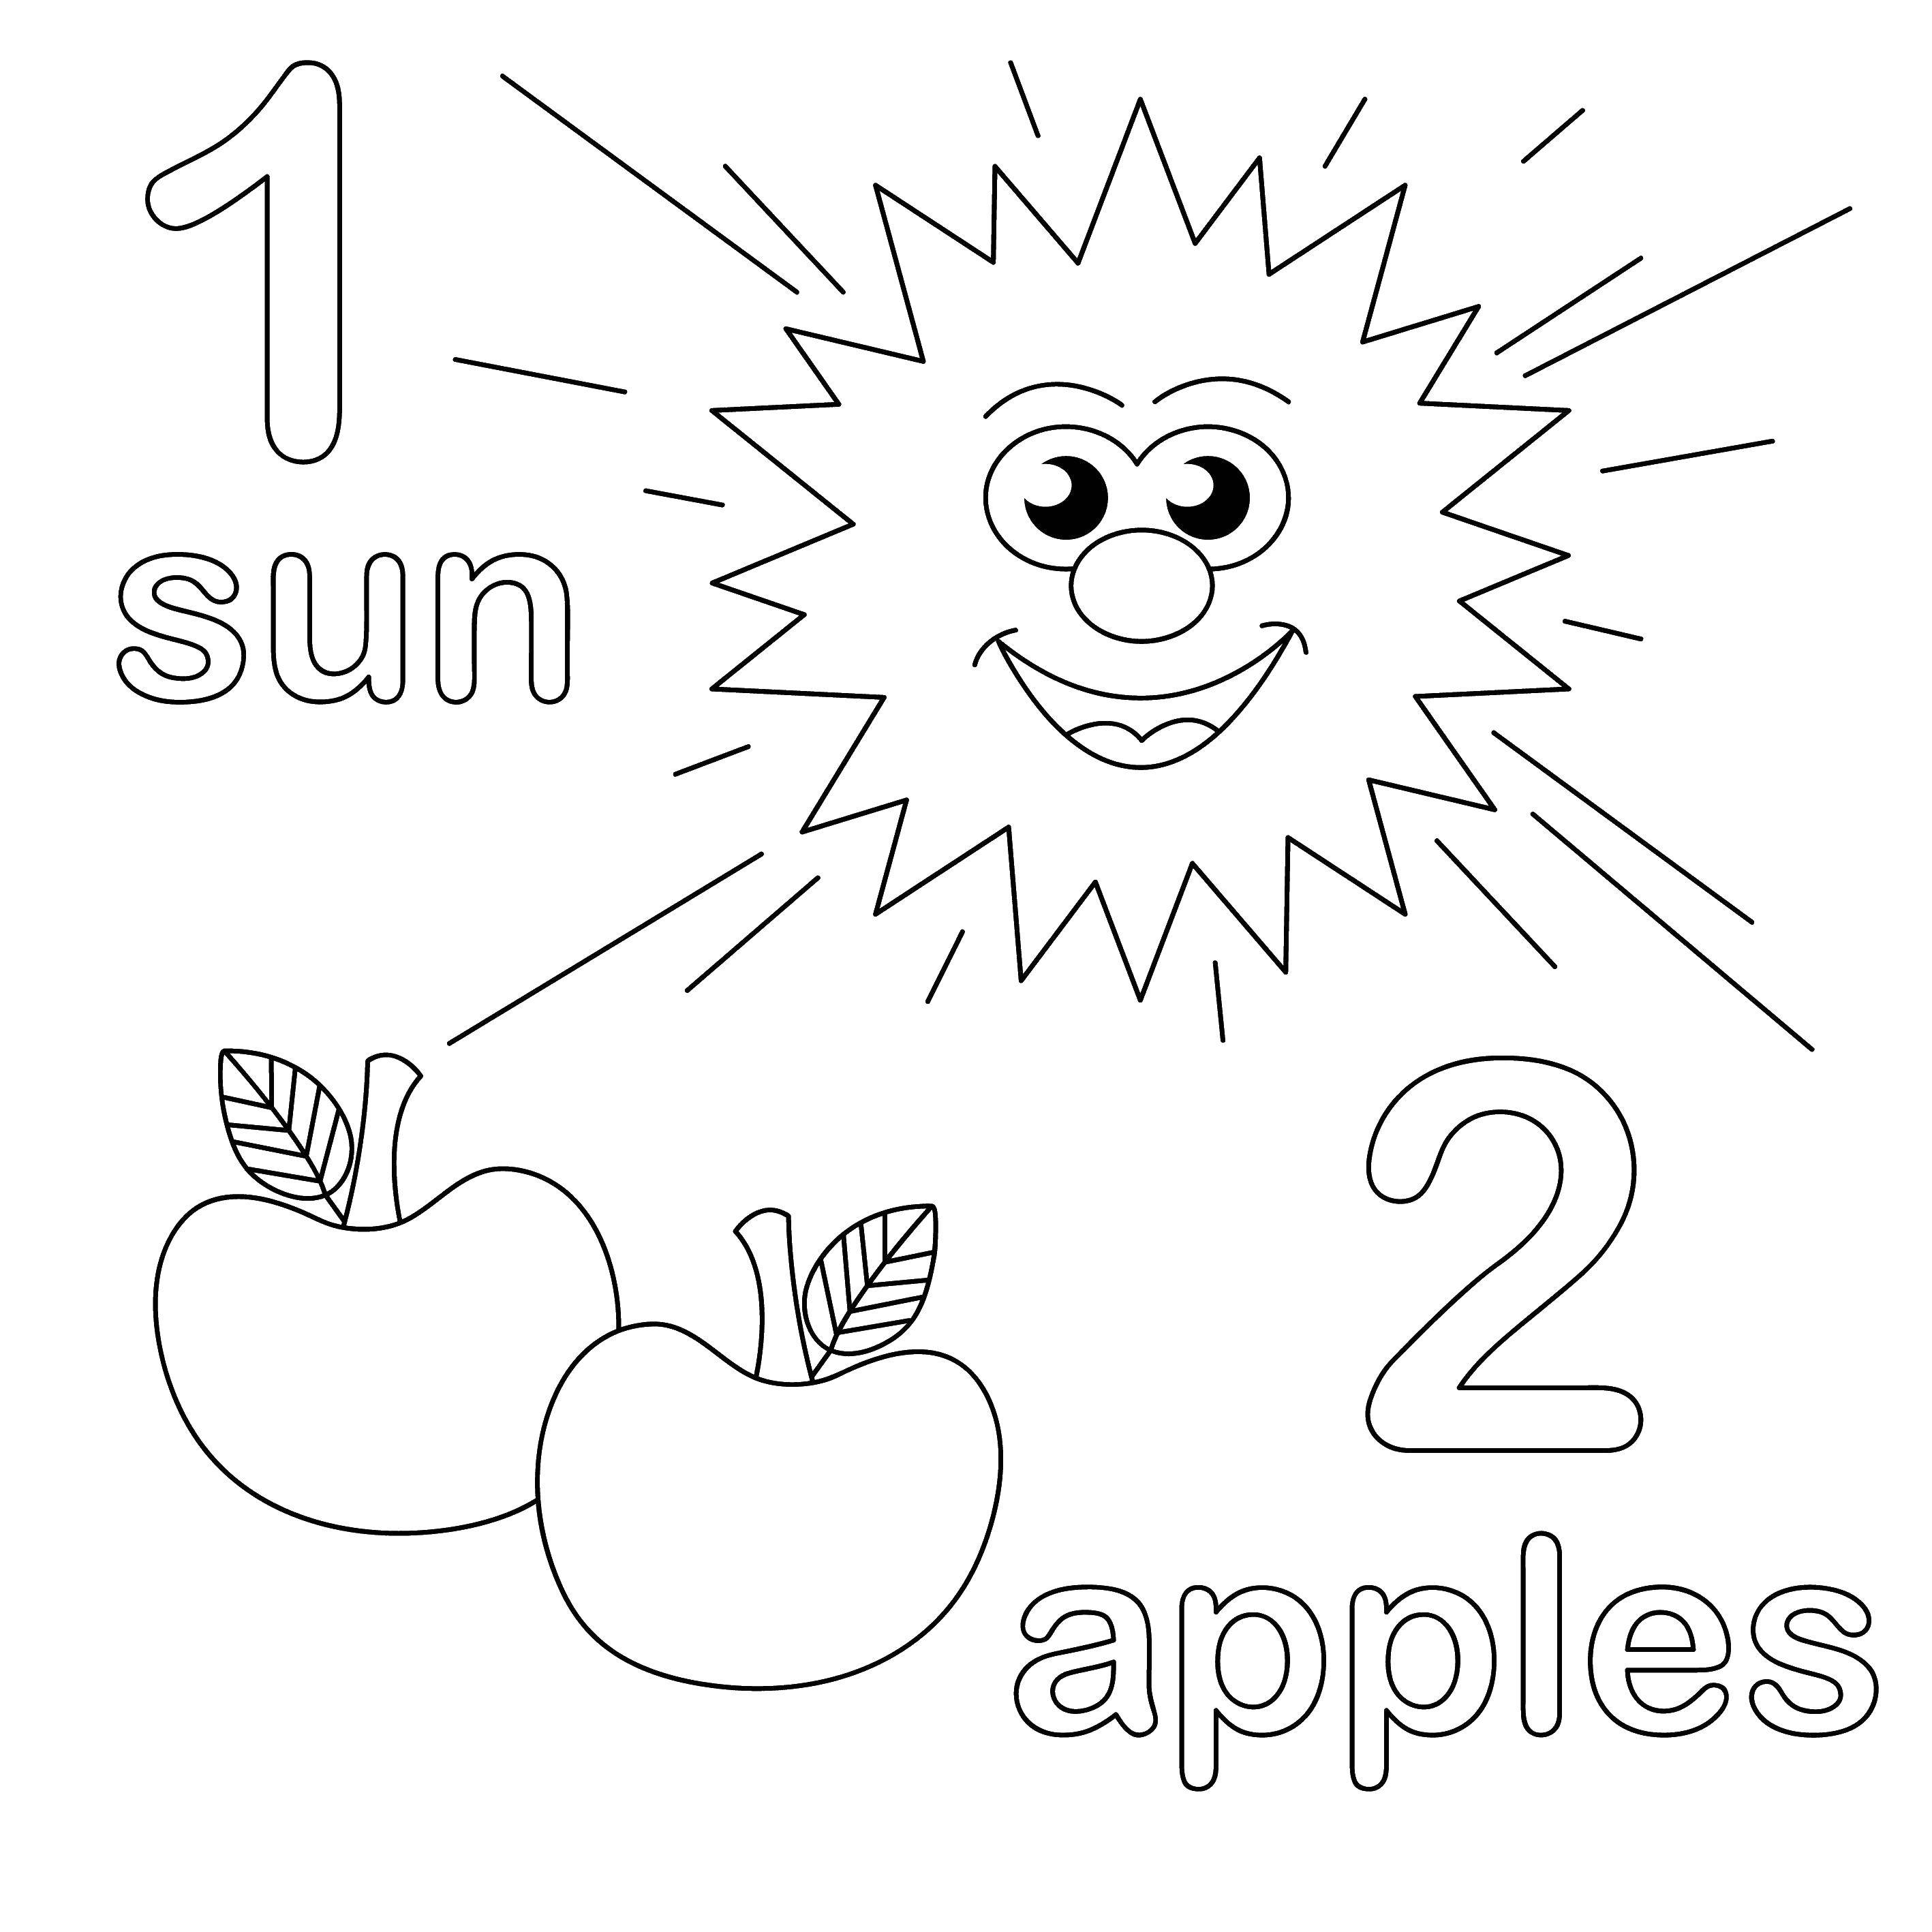 Coloring The sun and 2 apples. Category the objects. Tags:  the sun, apples.